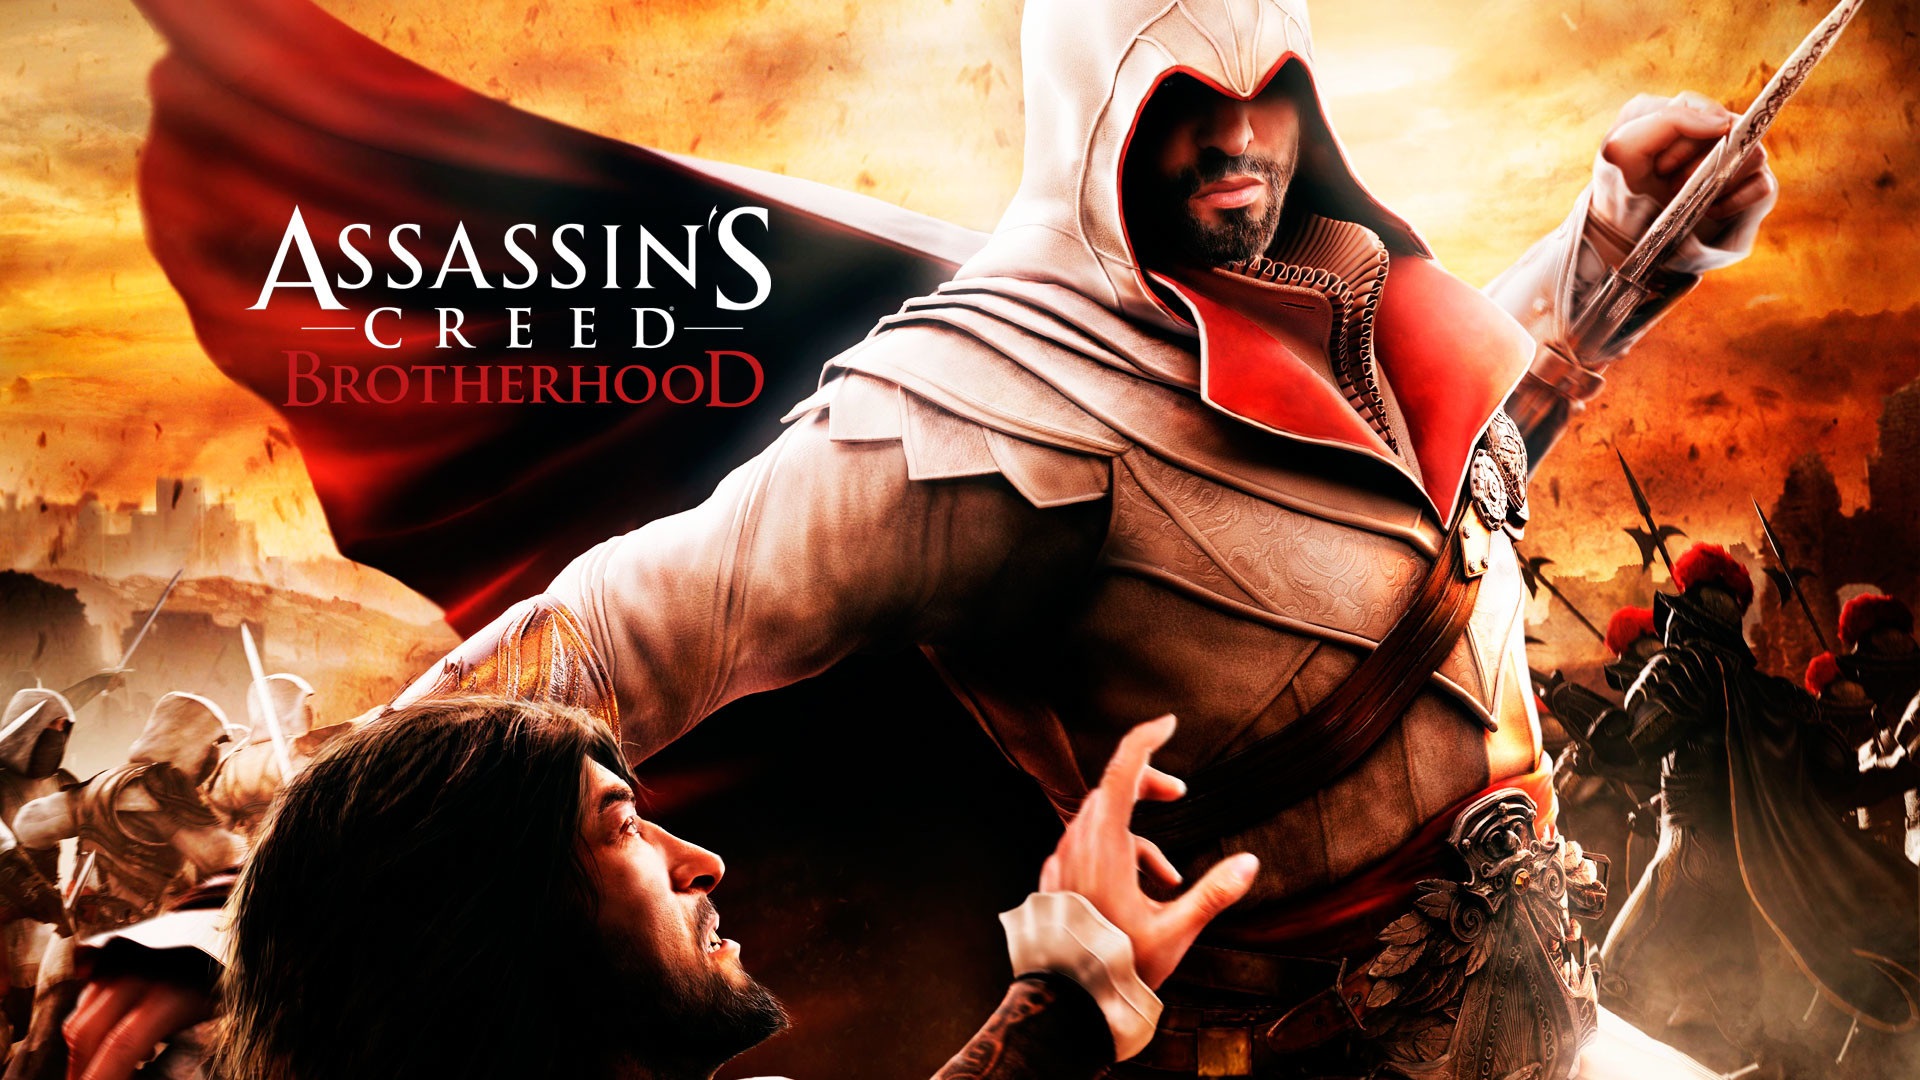 Let’s Play Assassin’s Creed Brotherhood